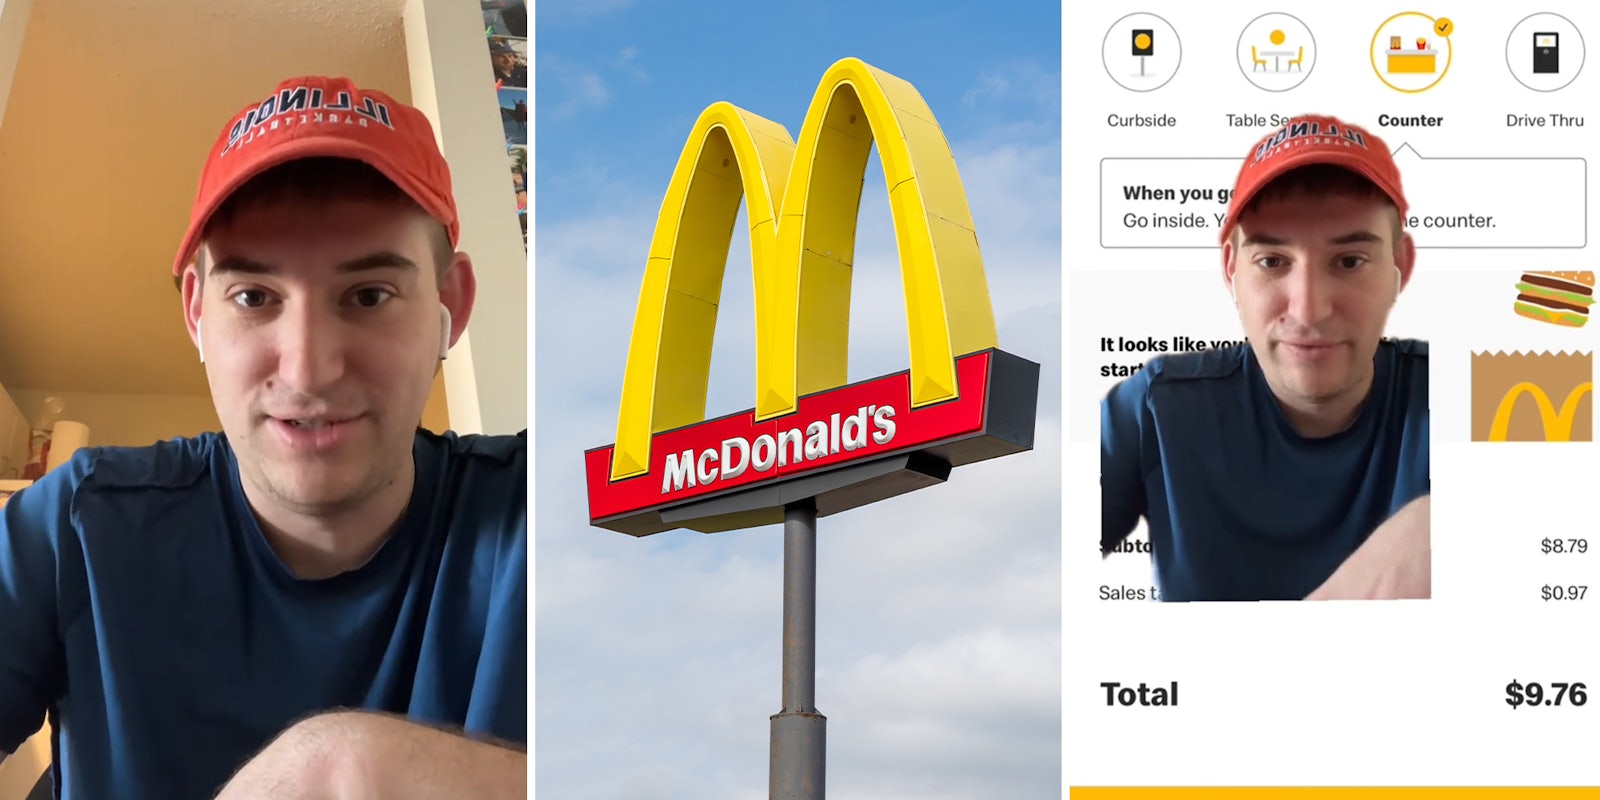 Customer slams McDonald’s for price increases, says they’re losing working class customers